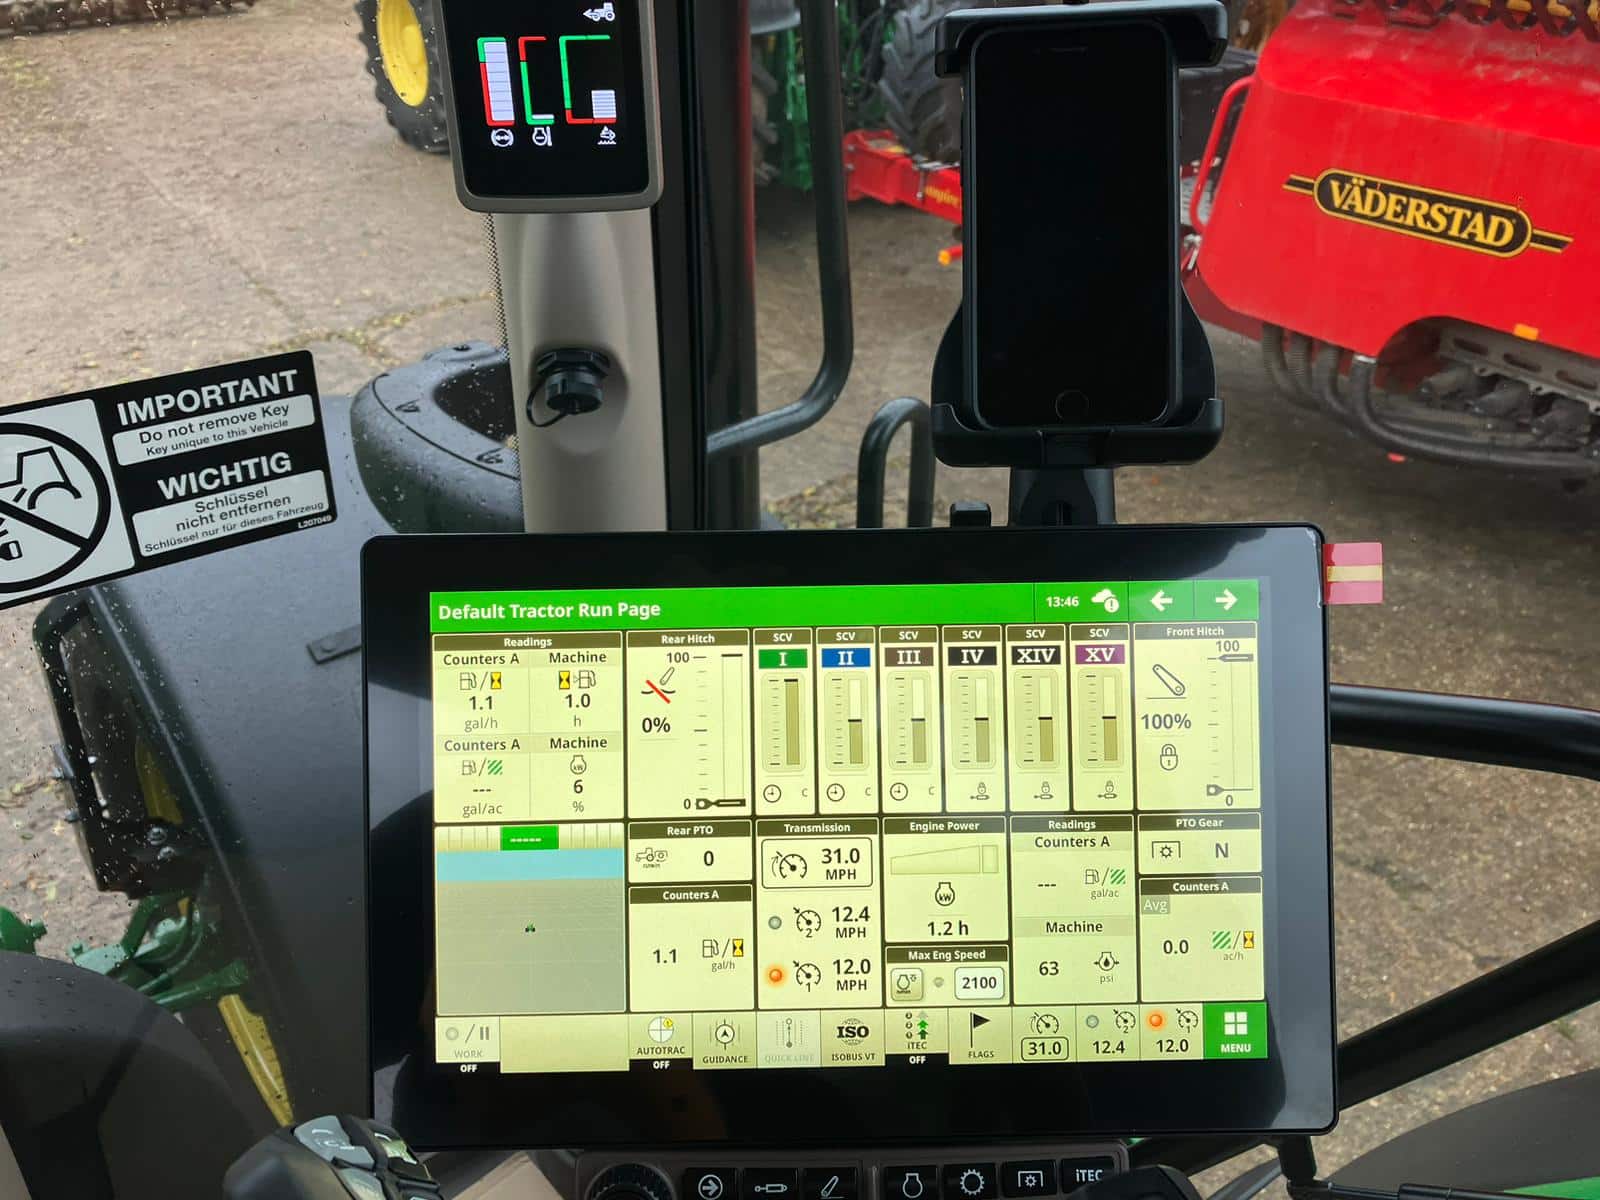 Our Review of the New John Deere G5 Display